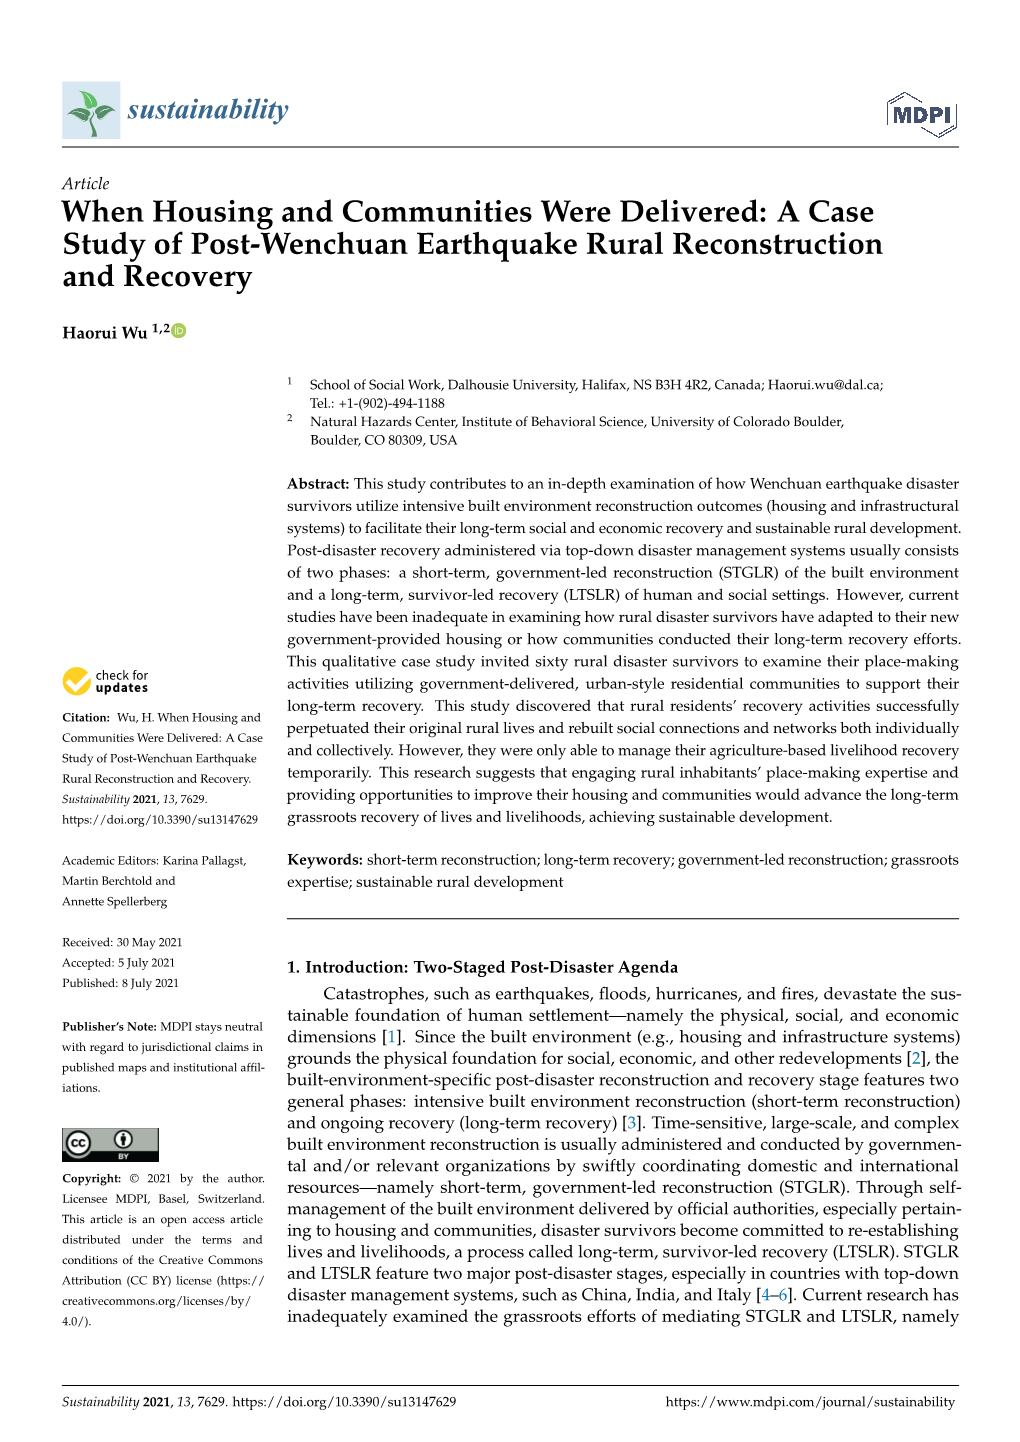 A Case Study of Post-Wenchuan Earthquake Rural Reconstruction and Recovery